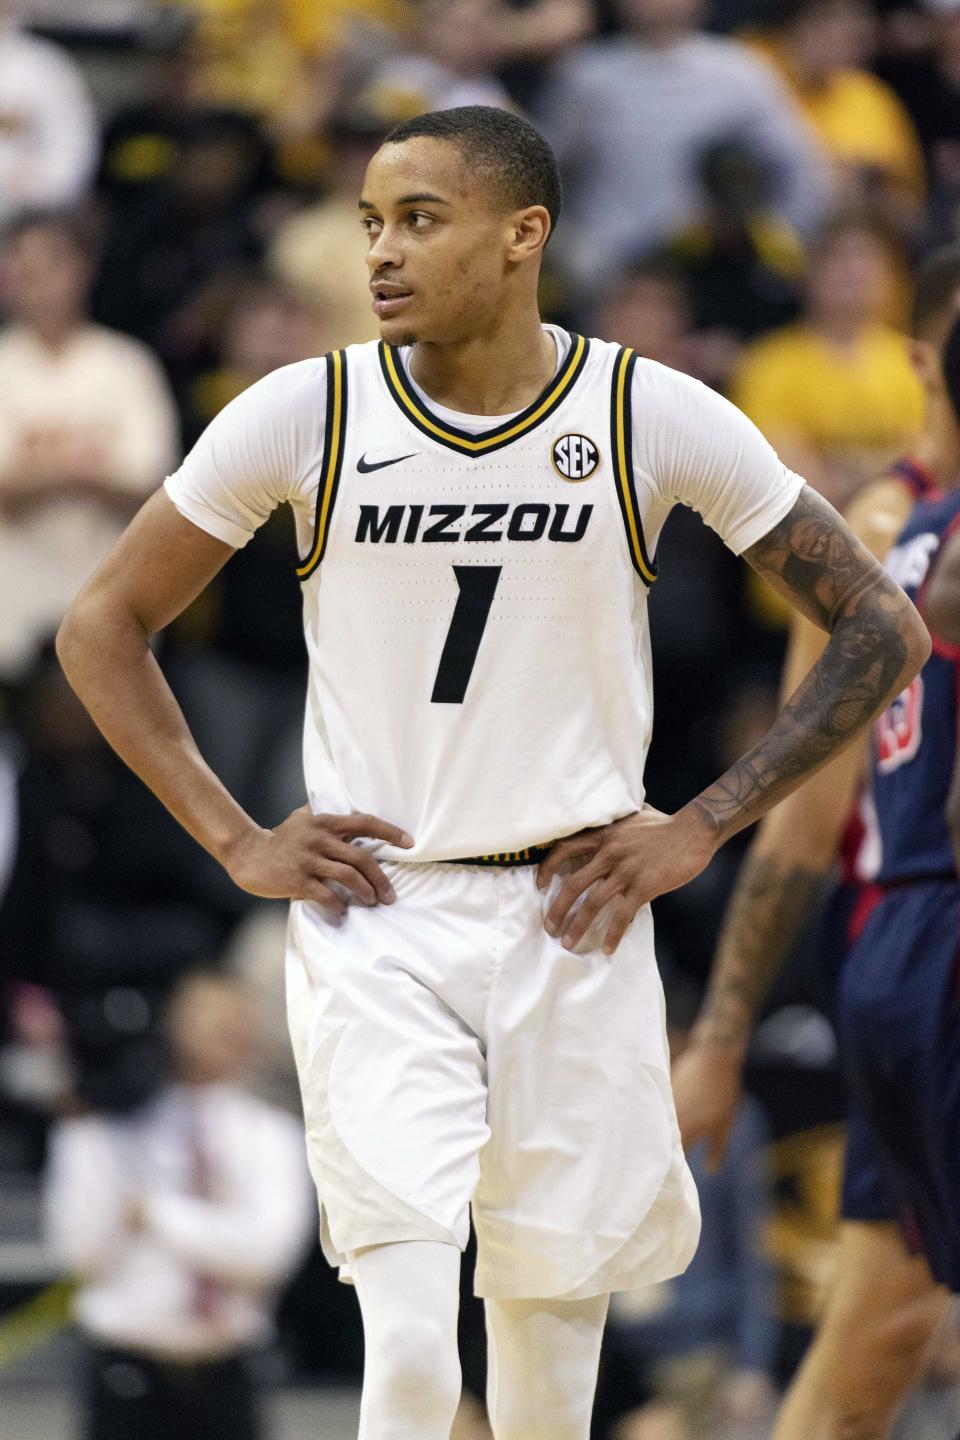 Missouri's Xavier Pinson walks up court after getting called for a technical foul during the first half of an NCAA college basketball game against Mississippi Tuesday, Feb. 18, 2020, in Columbia, Mo. (AP Photo/L.G. Patterson)